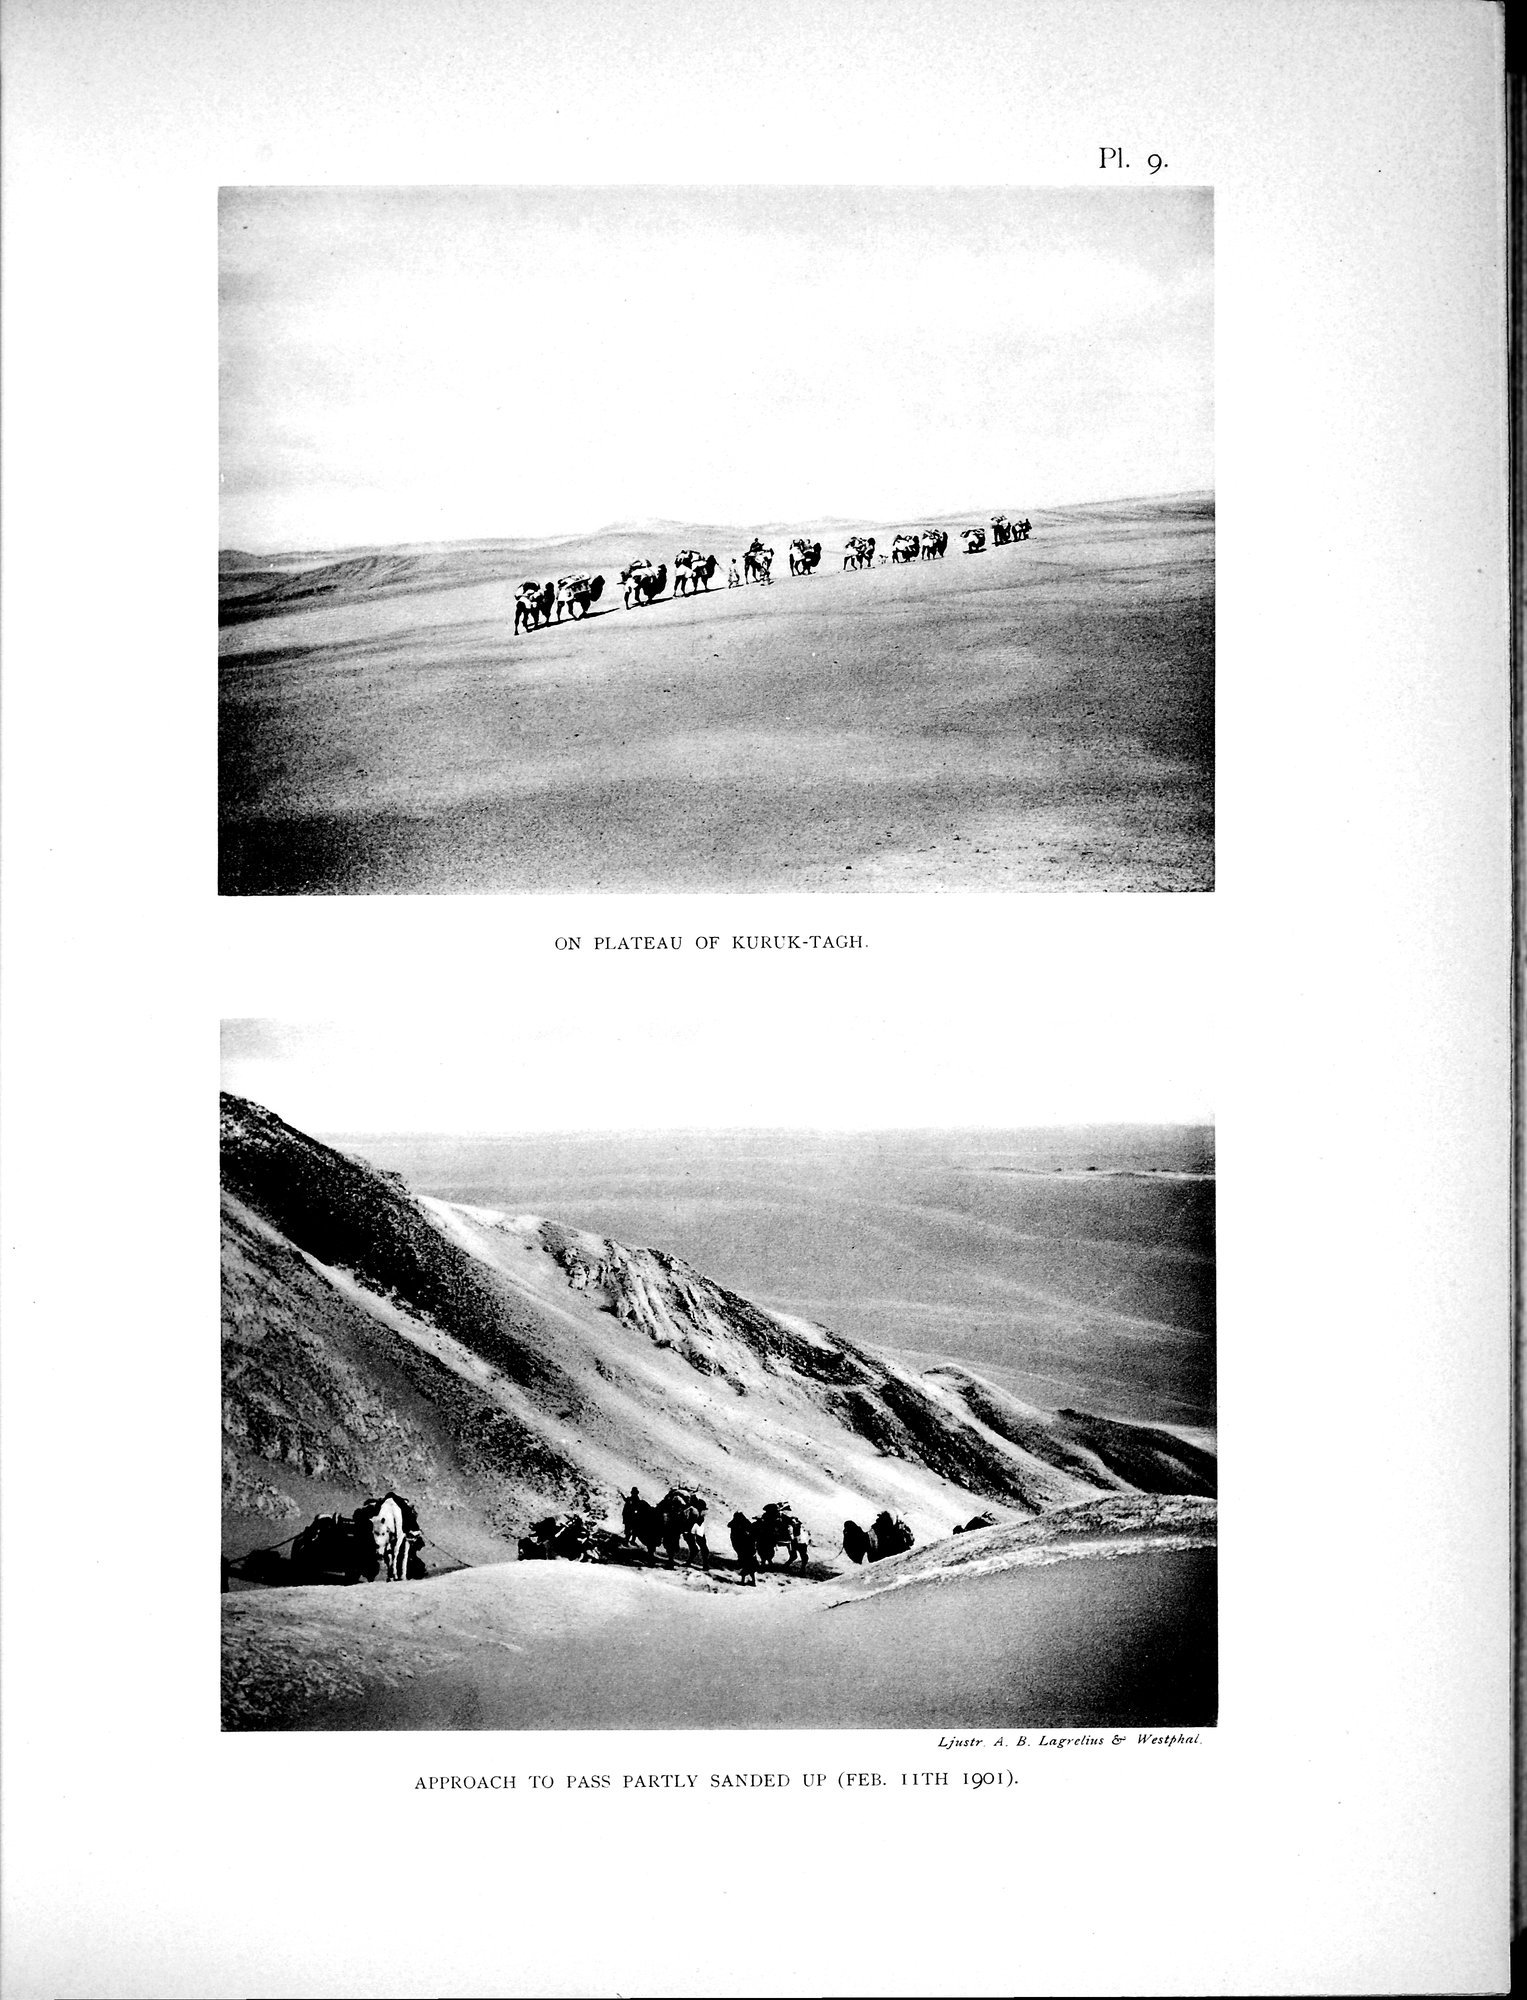 Scientific Results of a Journey in Central Asia, 1899-1902 : vol.2 / 139 ページ（白黒高解像度画像）